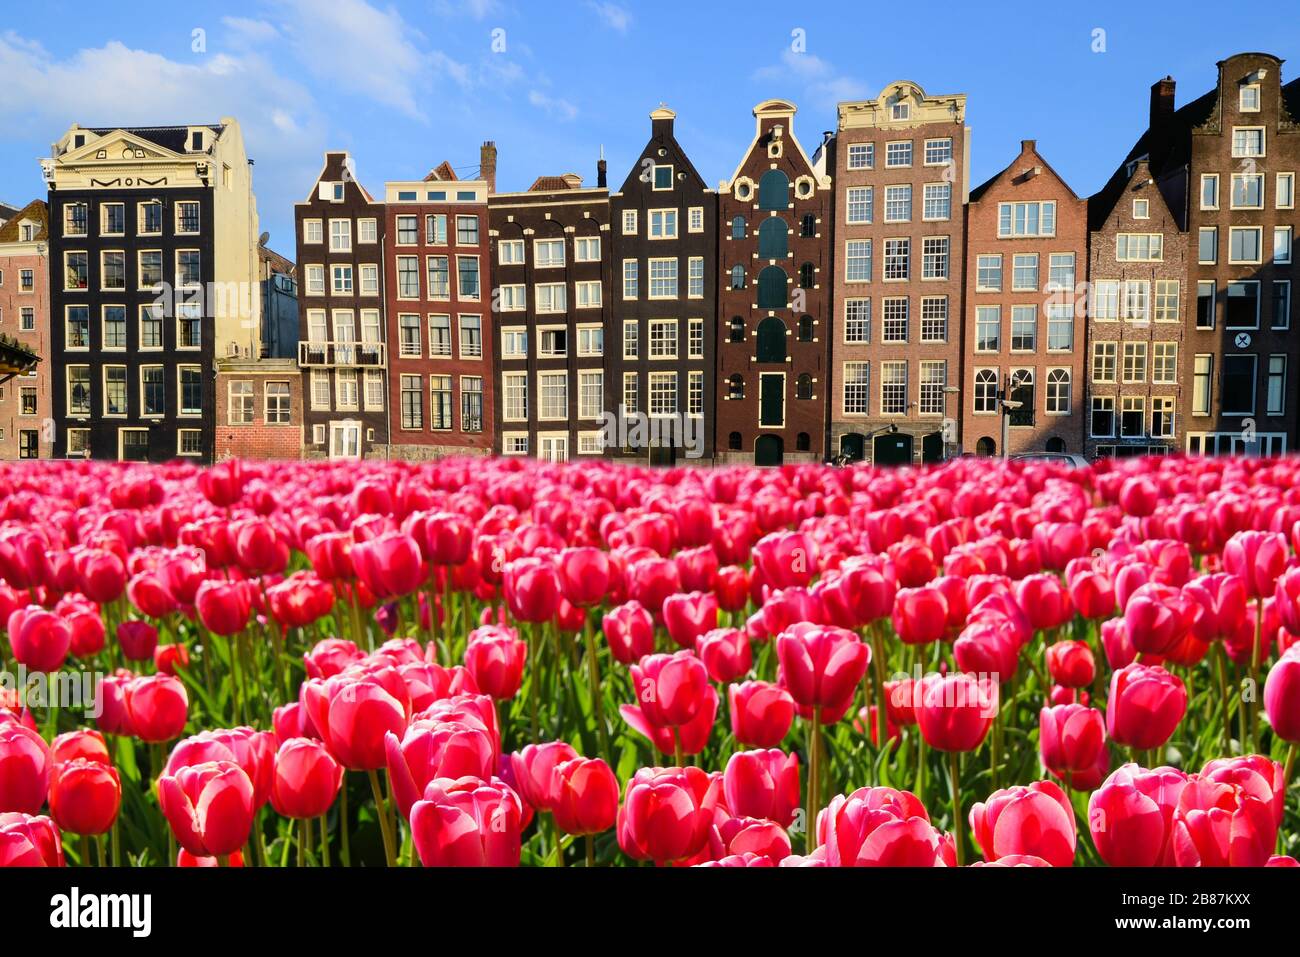 Vibrant pink tulips with canal houses of Amsterdam, Netherlands Stock Photo